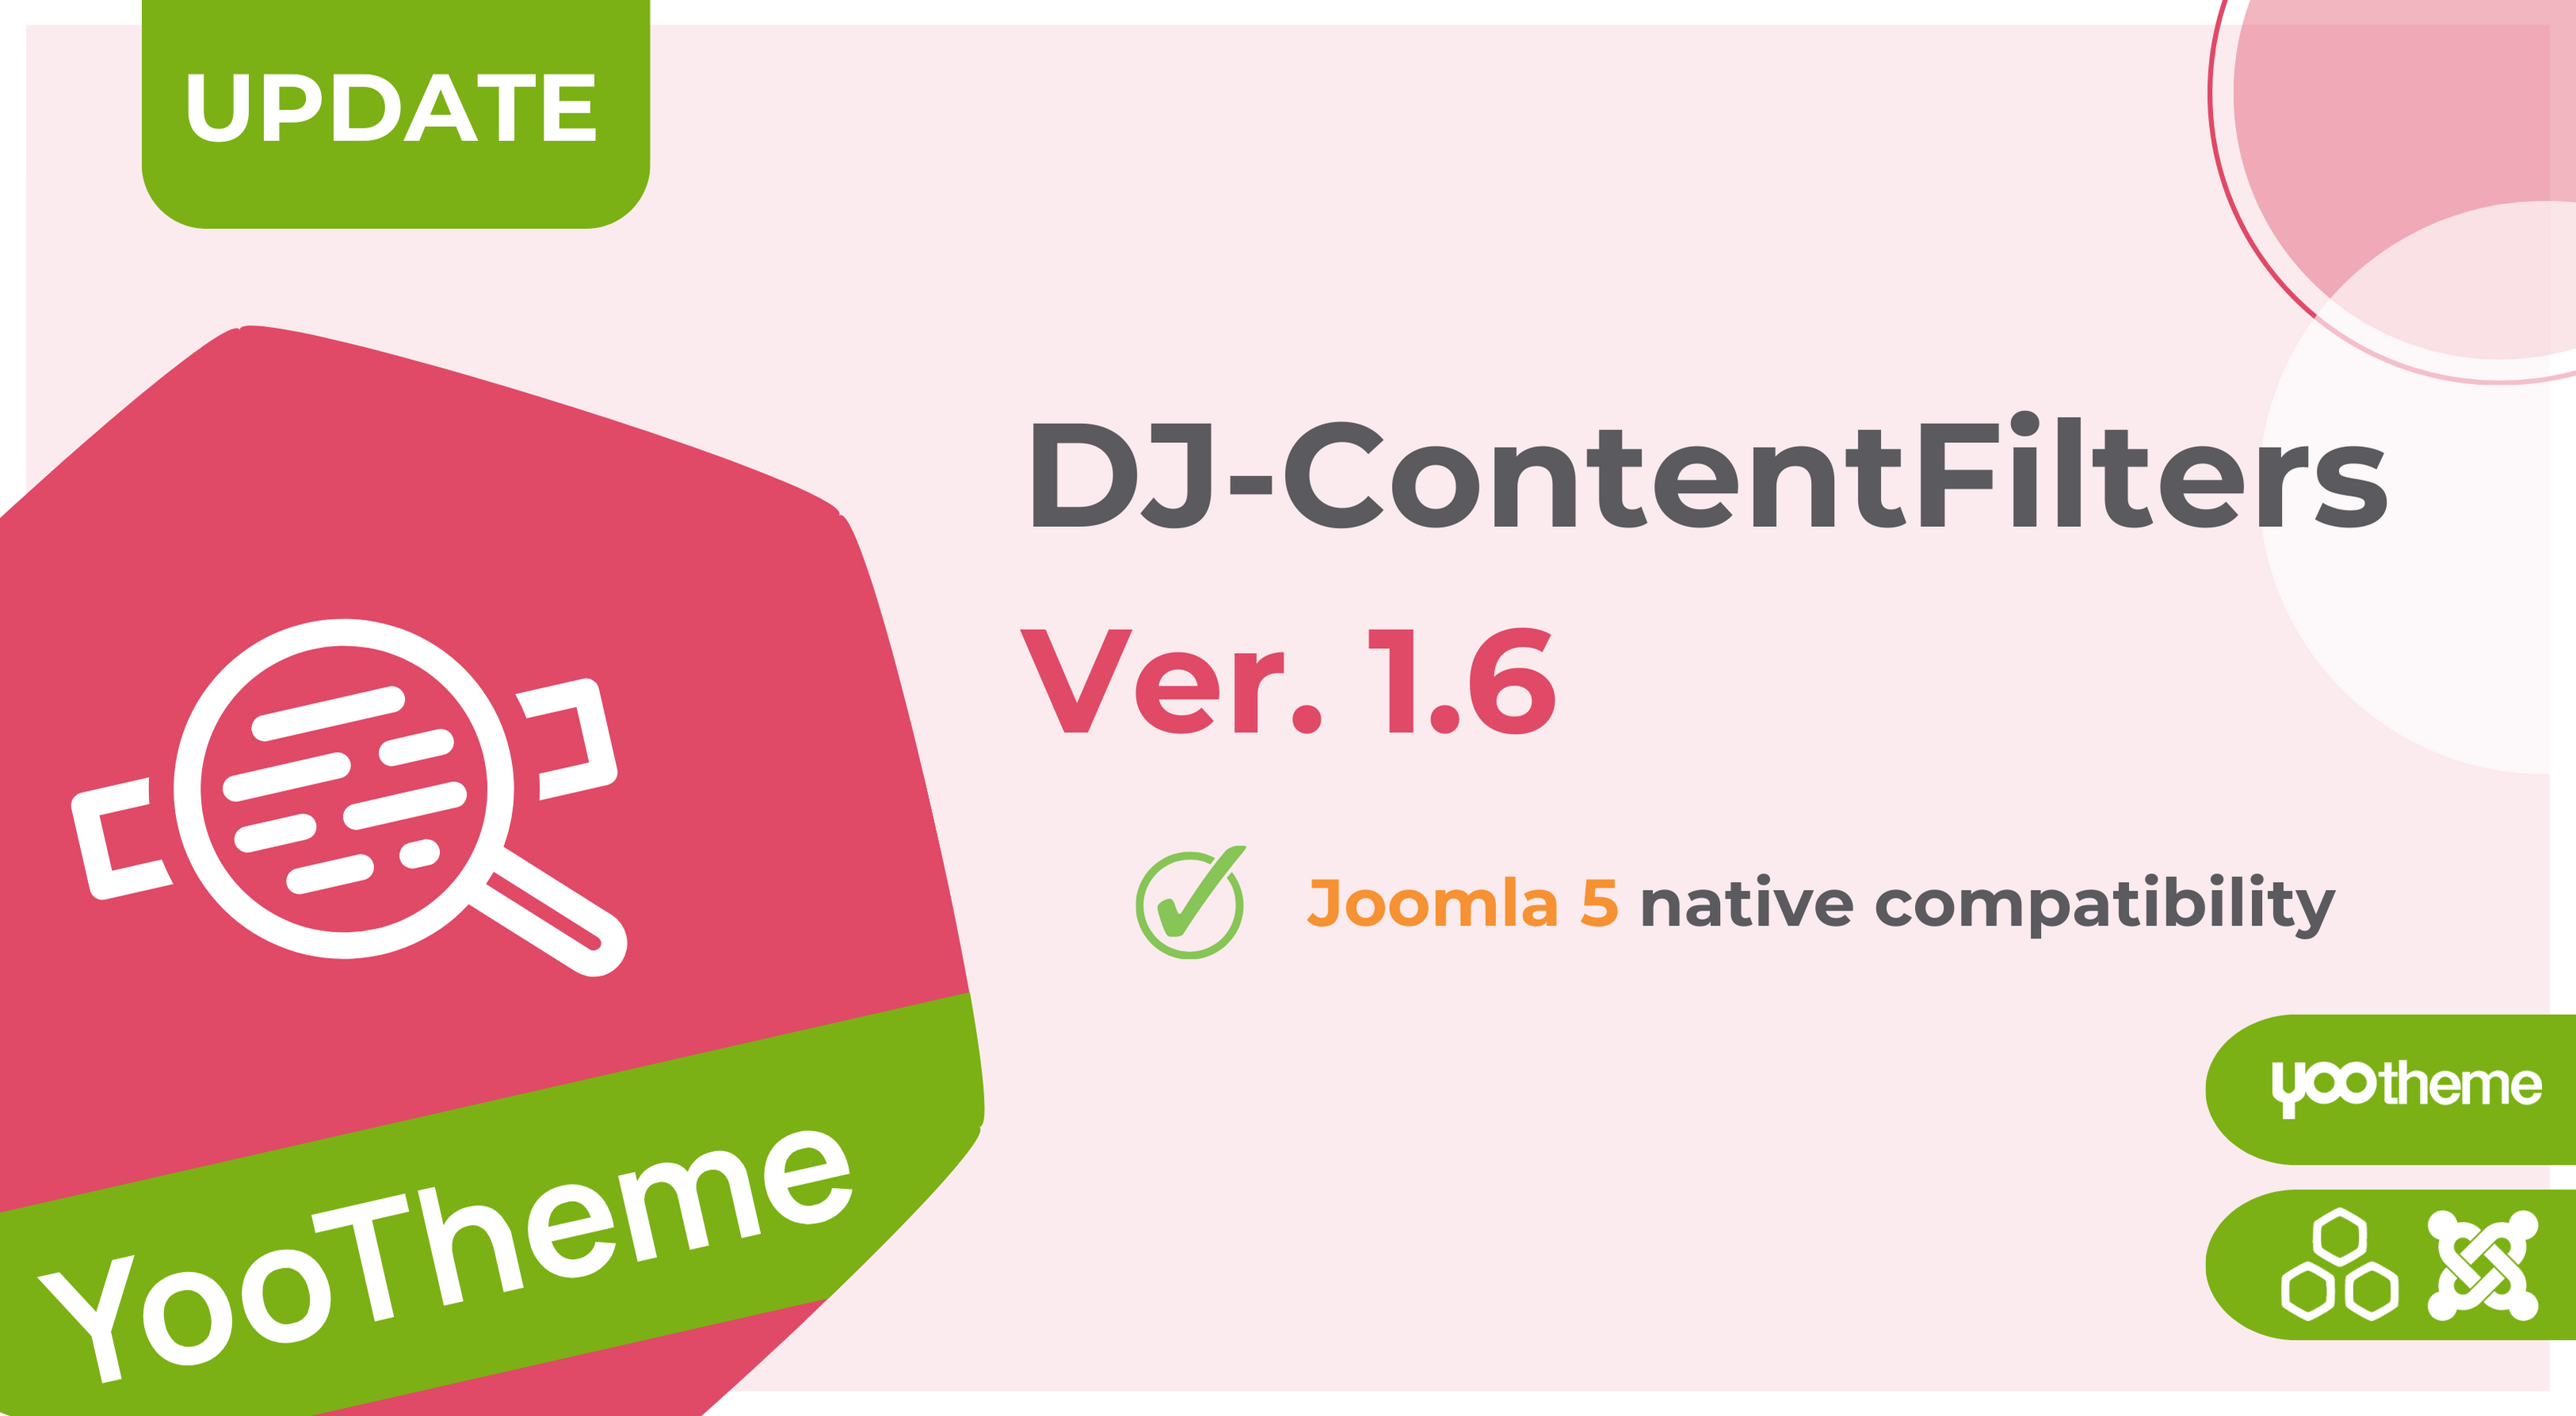 Enhanced Content Filtering: Introducing DJ-ContentFilters native compatible with Joomla 5!